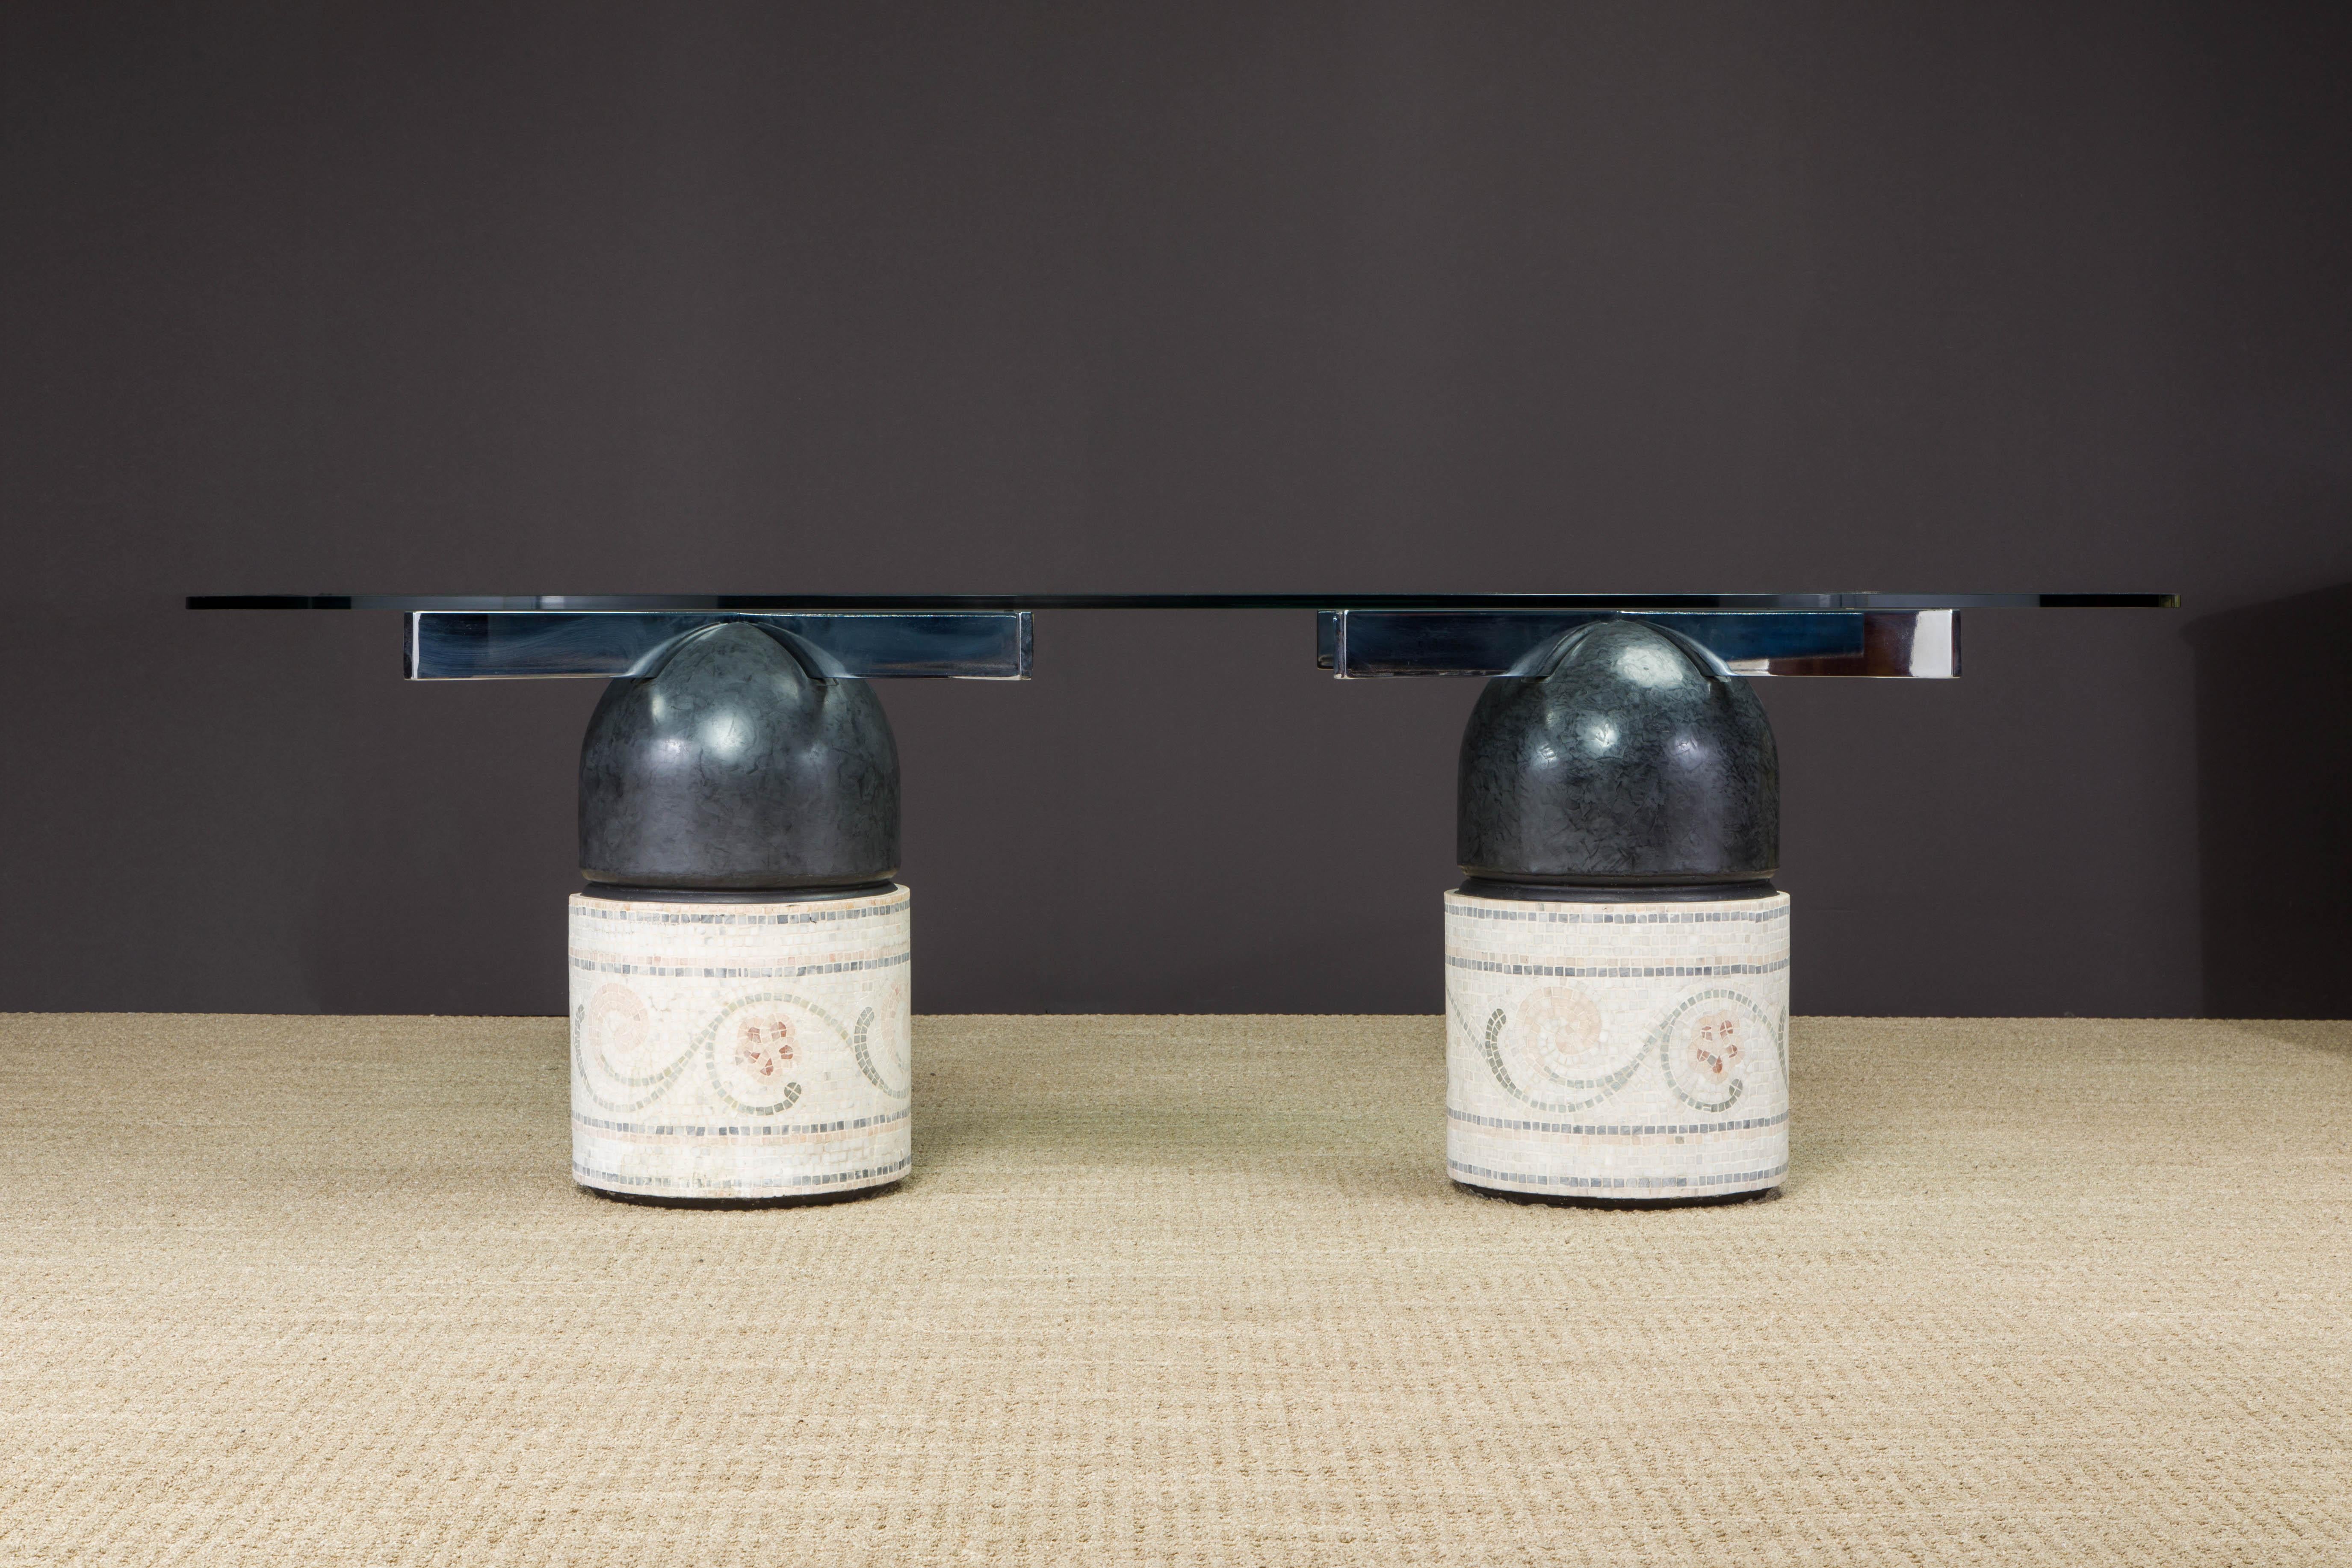 This pair of customized 'Paracarro' dining table bases are originally by Giovanni Offredi for Saporiti Italia which are sculpted from concrete and chromed steel during the 1970s in Italy. Sometime later, these bases were customized with mosaic tiles